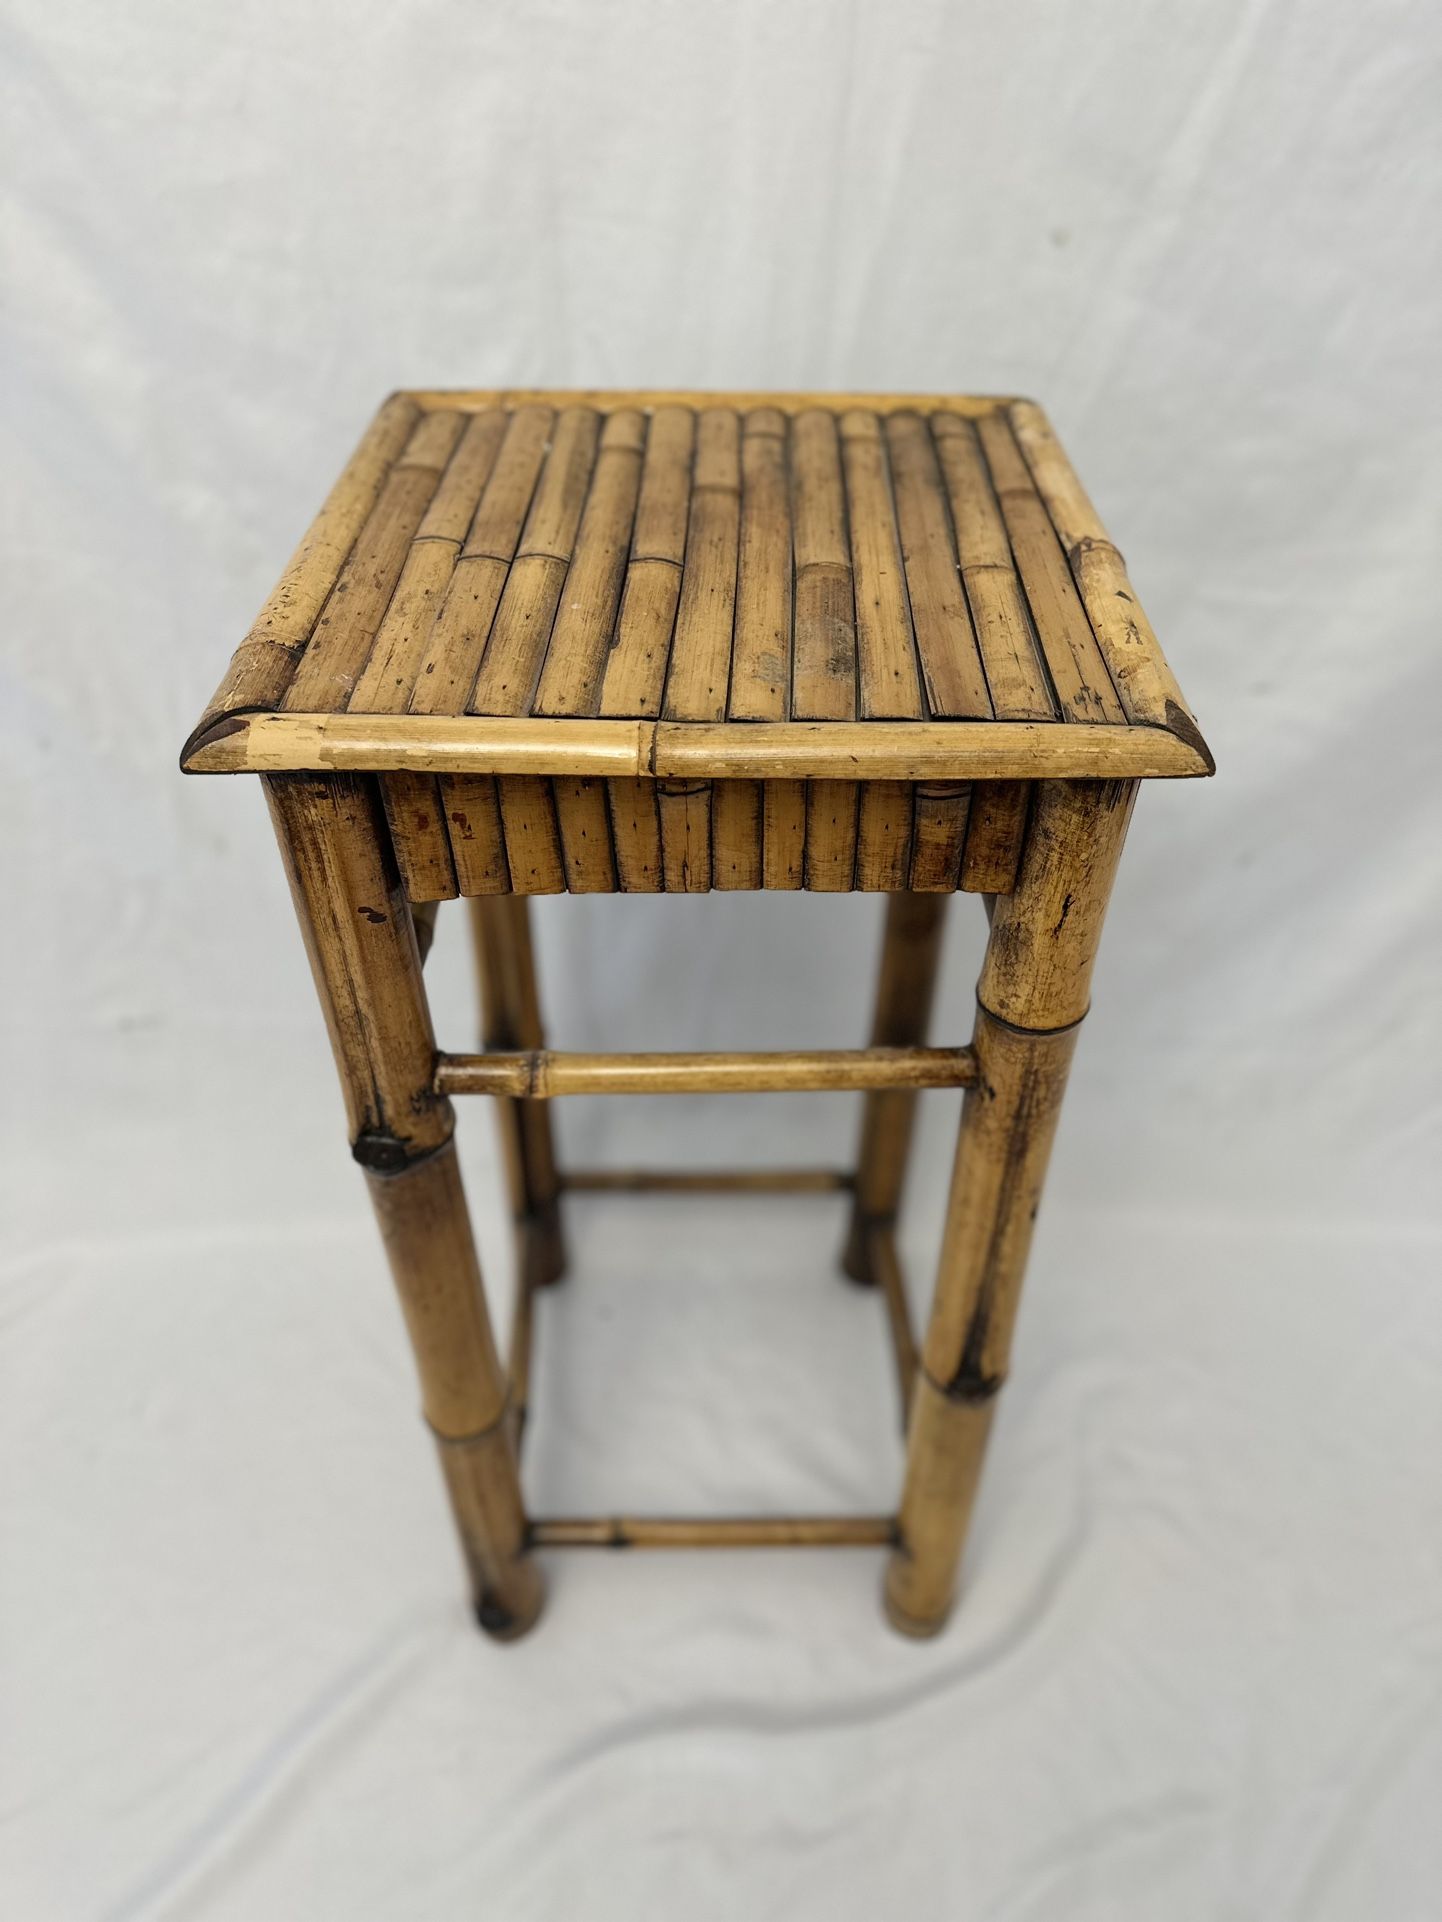 Vintage Mid Century Modern Bamboo Asian Boho Chic Square Plant Table!